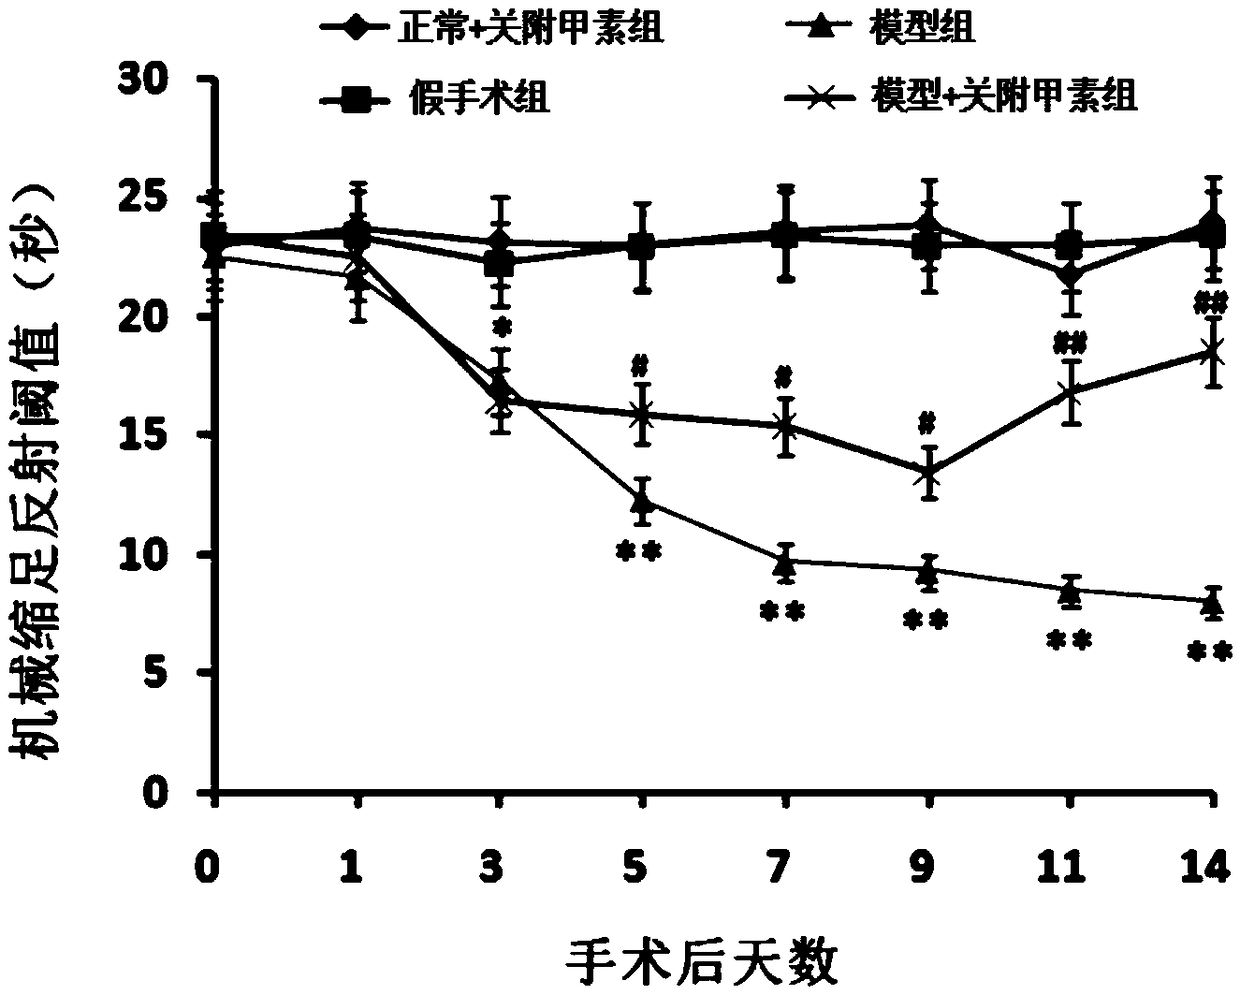 Application of GFA (Guanfu base A) in preparation of drug for neuropathic pain